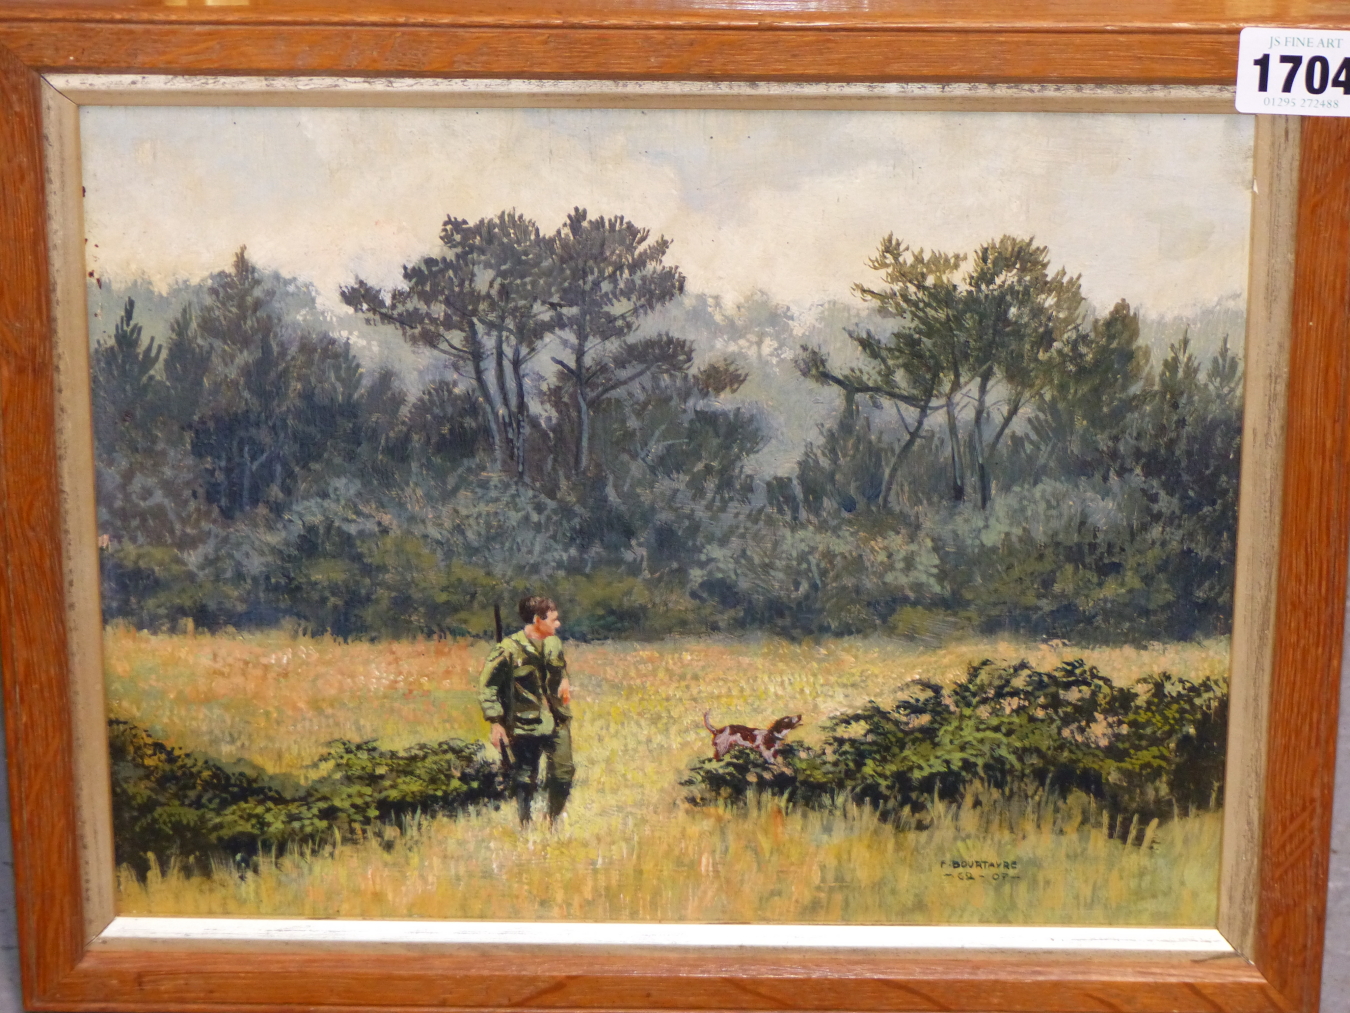 F. BOURTAYRE, 20TH C. GAMEKEEPER AND DOG. OIL ON PANEL, 23 X 29 CM. - Image 3 of 4